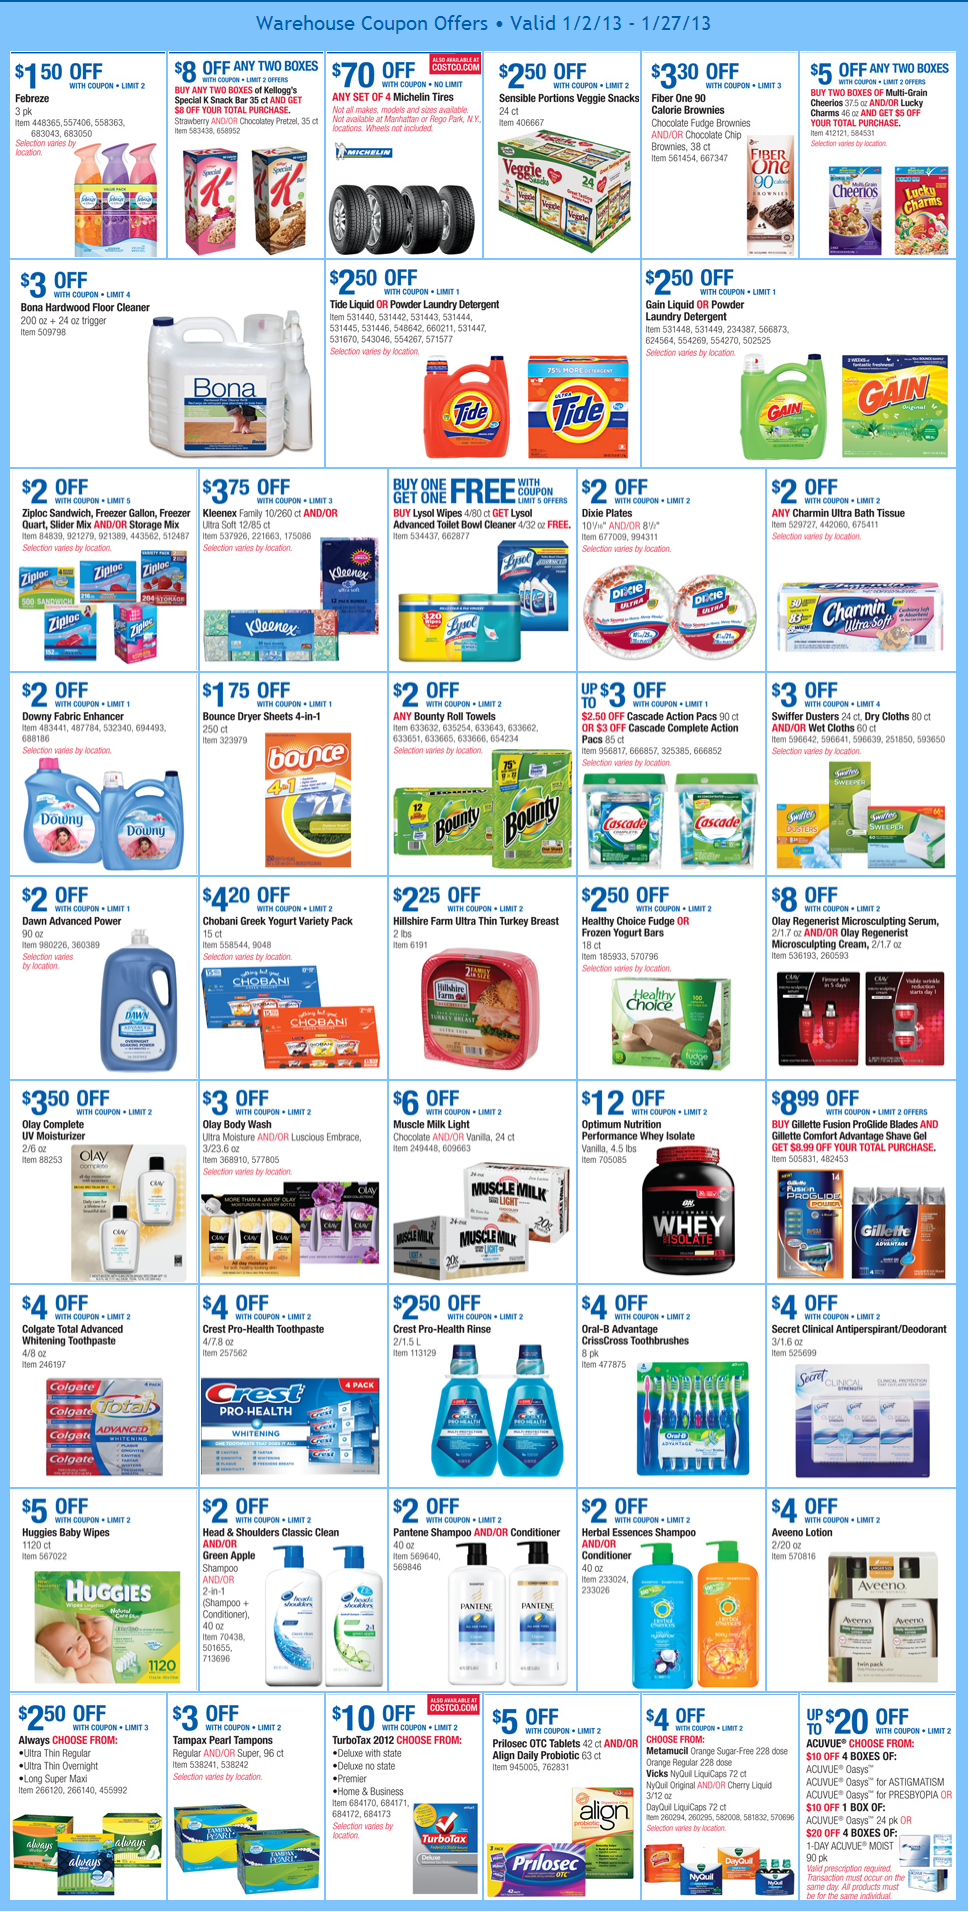 Warehouse Coupon Offers 20130102.png